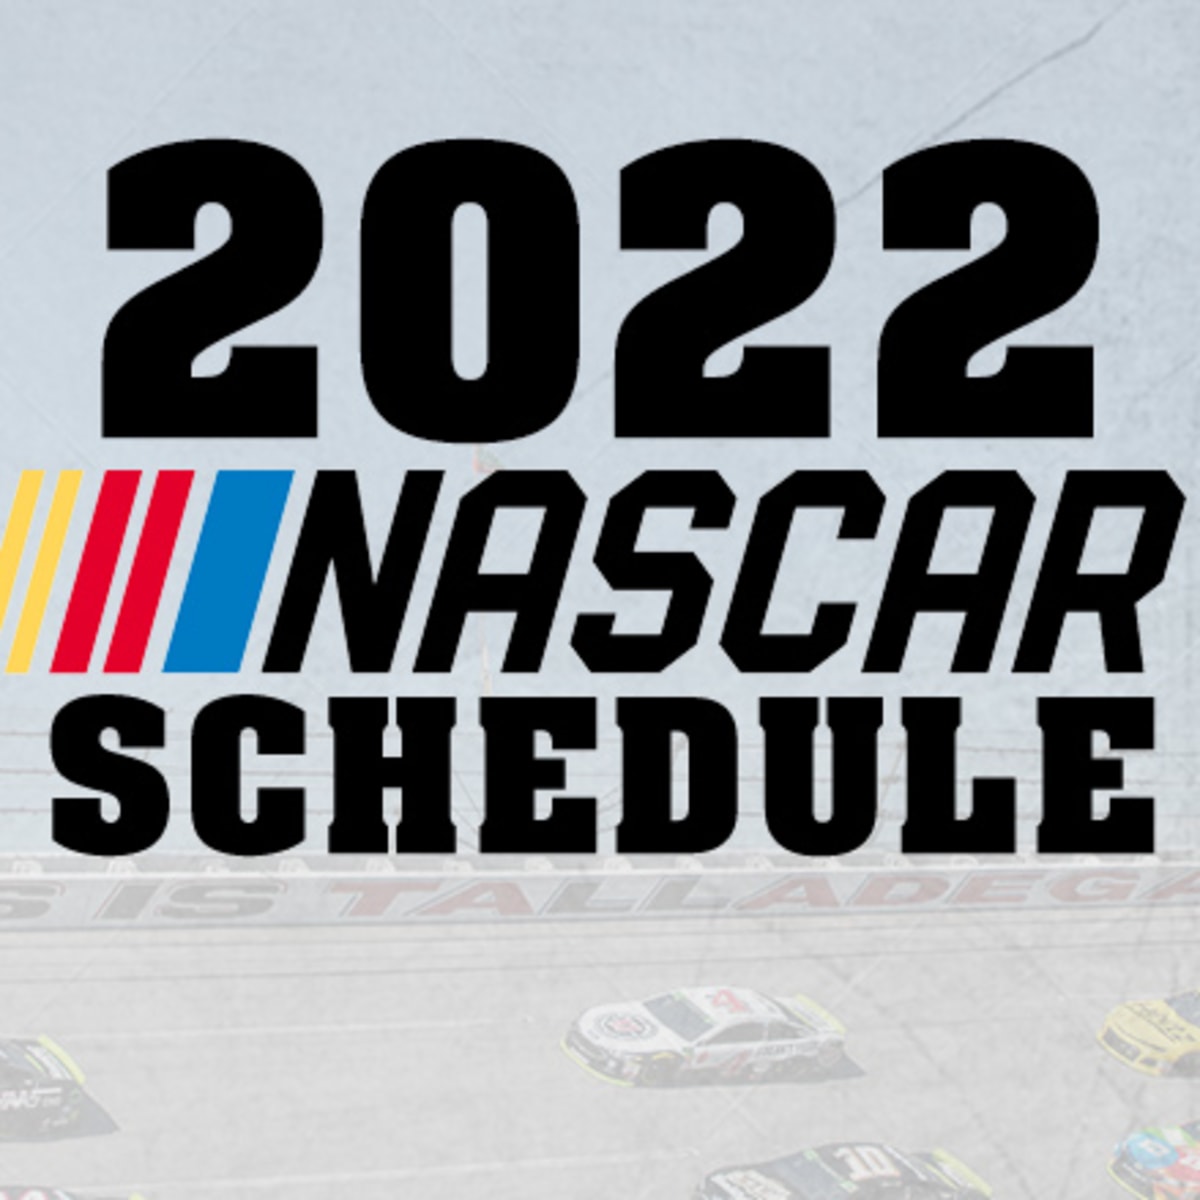 Nascar Printable Schedule 2022 2022 Nascar Schedule: Nascar Cup Series - Athlonsports.com | Expert  Predictions, Picks, And Previews